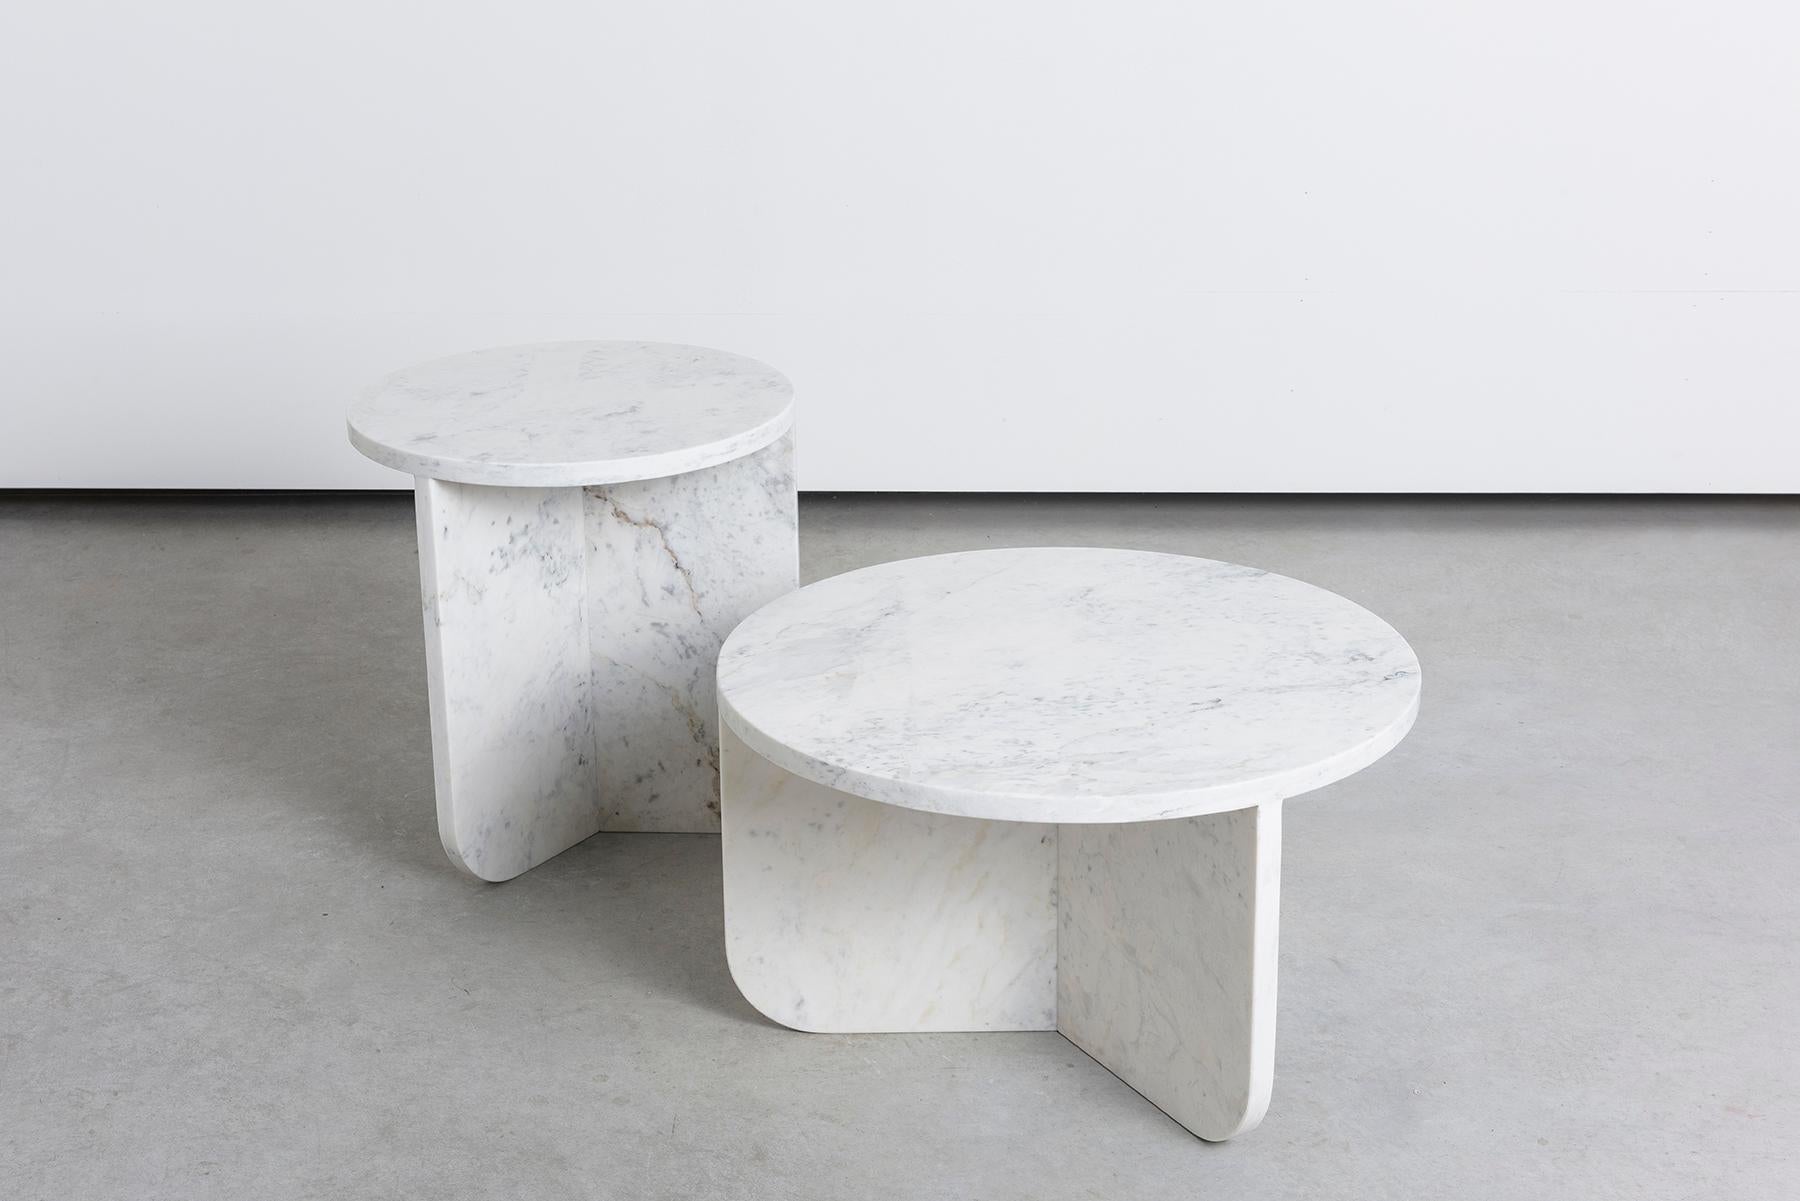 Brazilian Leme Table, High, by Rain, Contemporary Side Table, White Matarazzo Marble For Sale